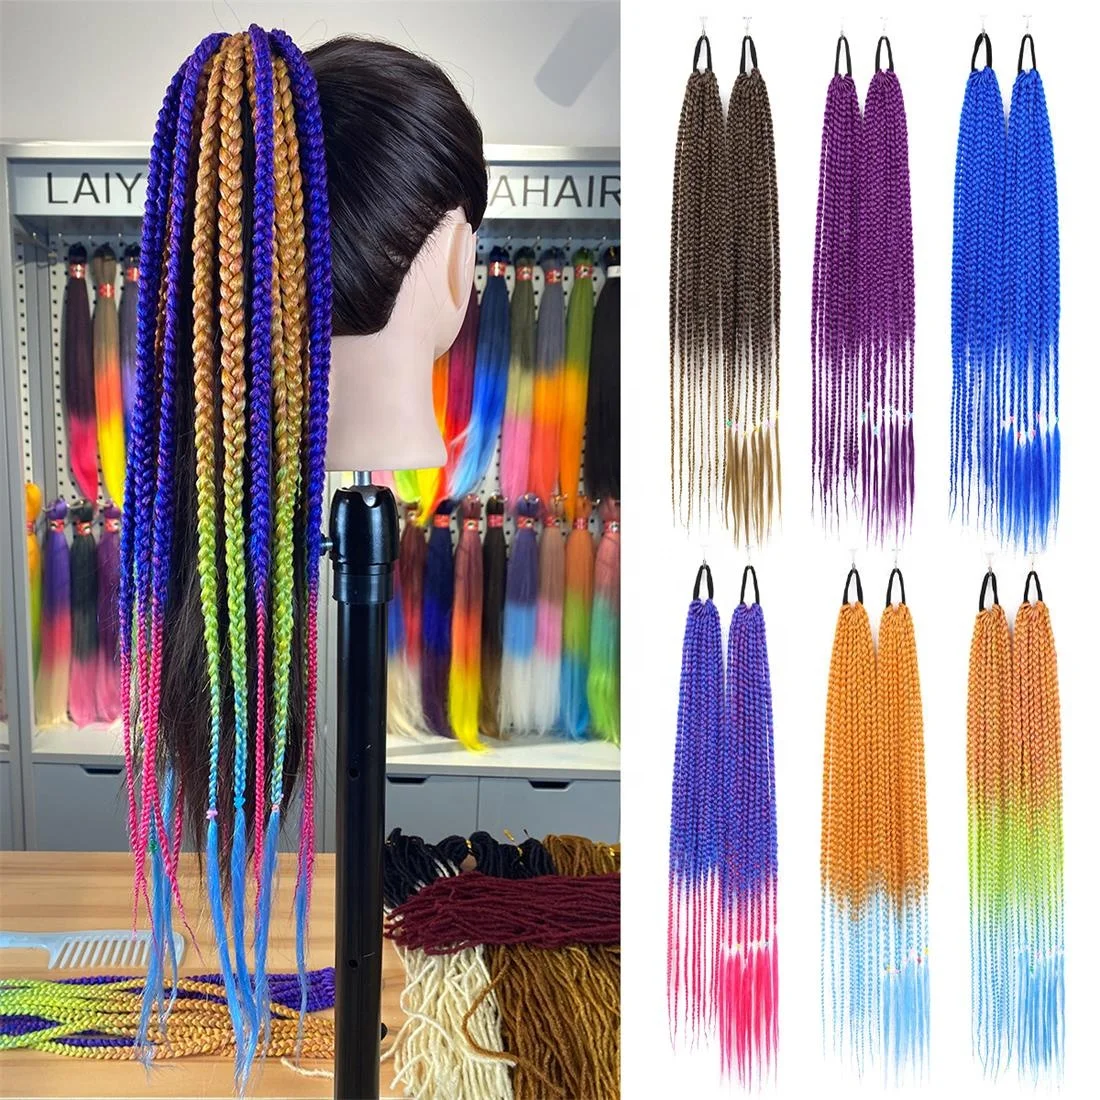 

24 inch Rainbow Crochet braid Synthetic Ponytail Braids Hair Extension Ponytail Hairpiece With Rubber Band Hair Ring